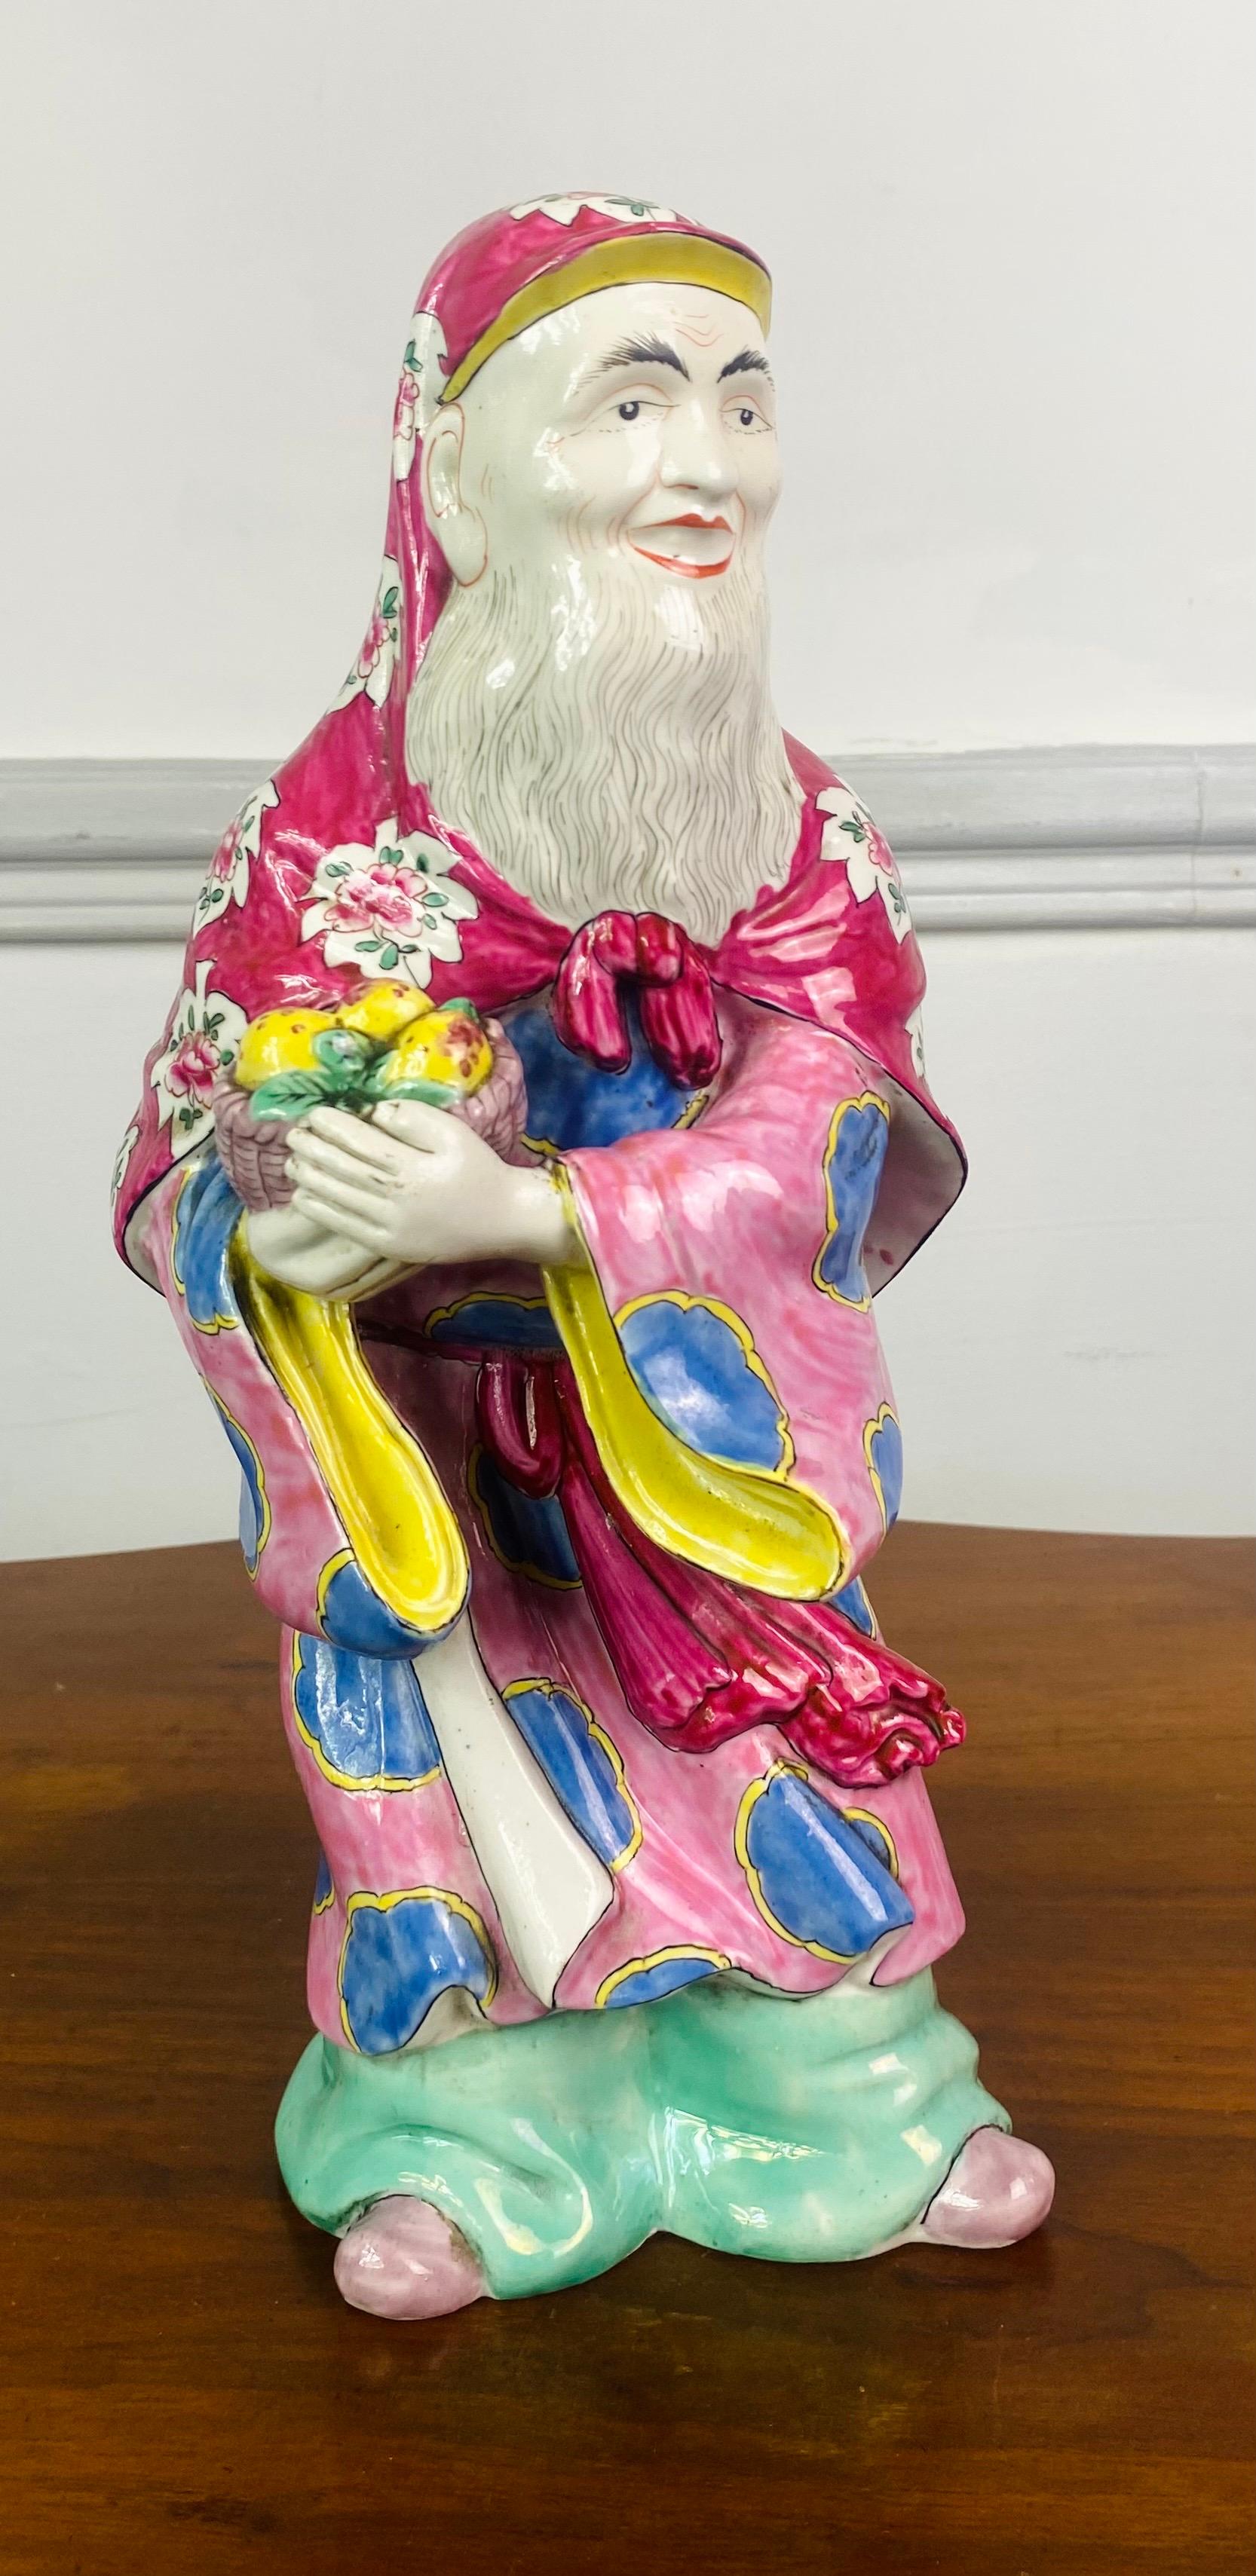 Very beautiful enameled porcelain statuette of the God Shou Lao, also called the old man of the South Pole. He is a Chinese Taoist god, Incarnation of the Antarctic stars, he is the god of wealth and longevity. He is shown here with a basket of